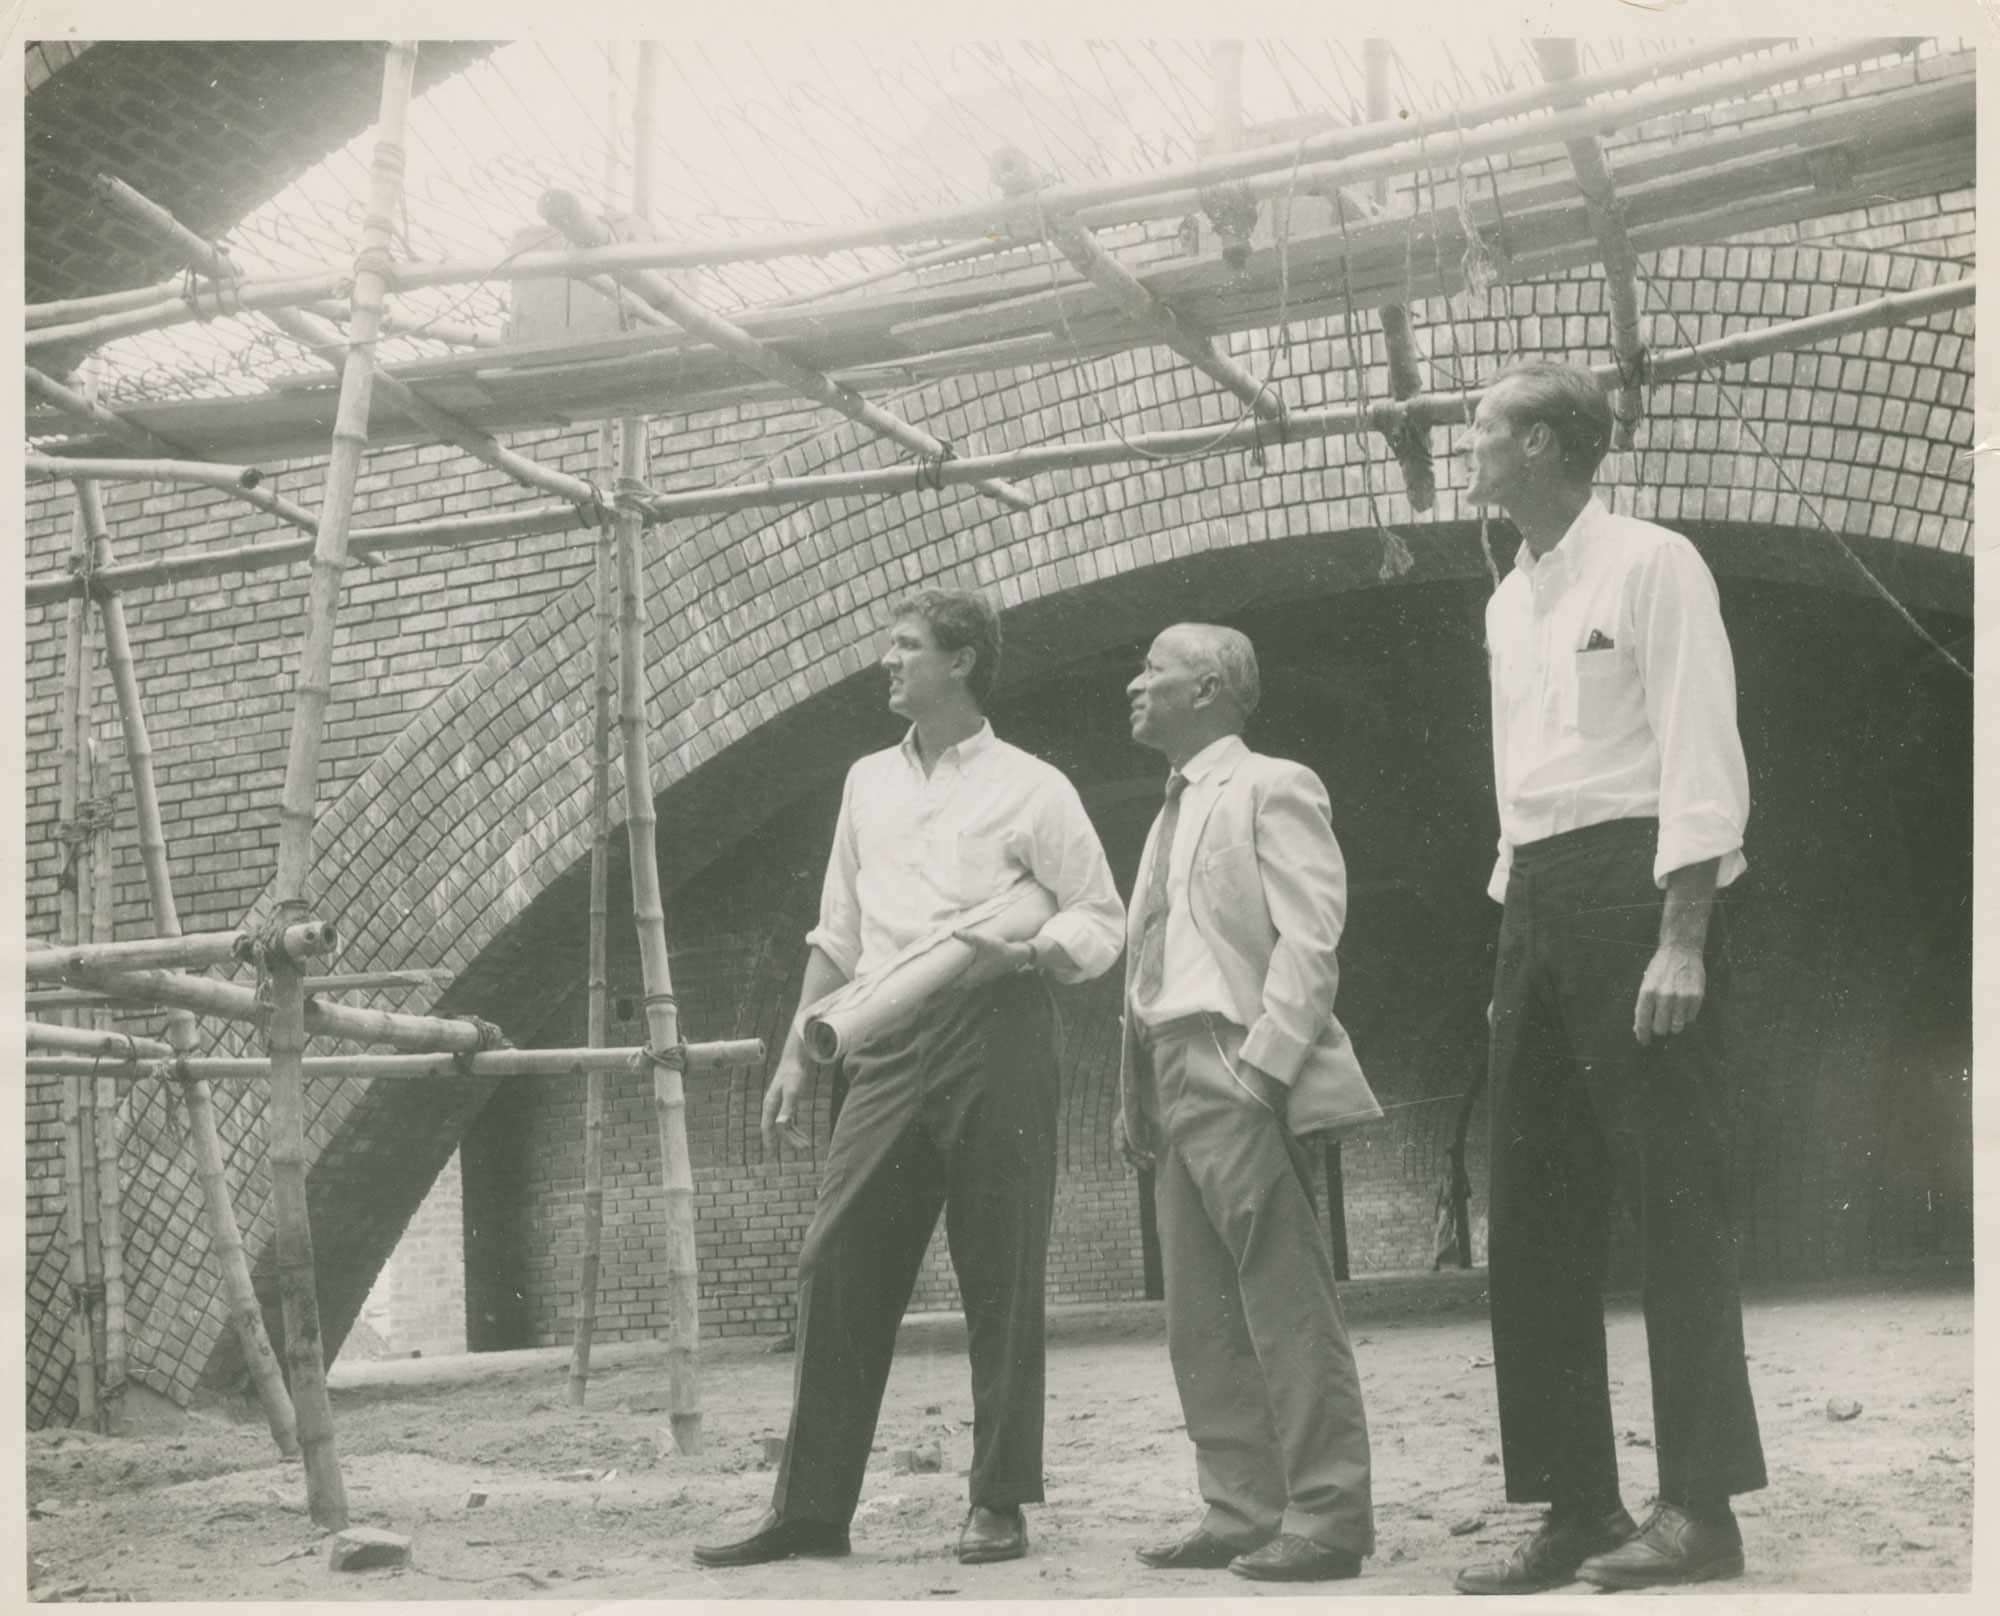 Roy Volmer with other engineers at Dhaka